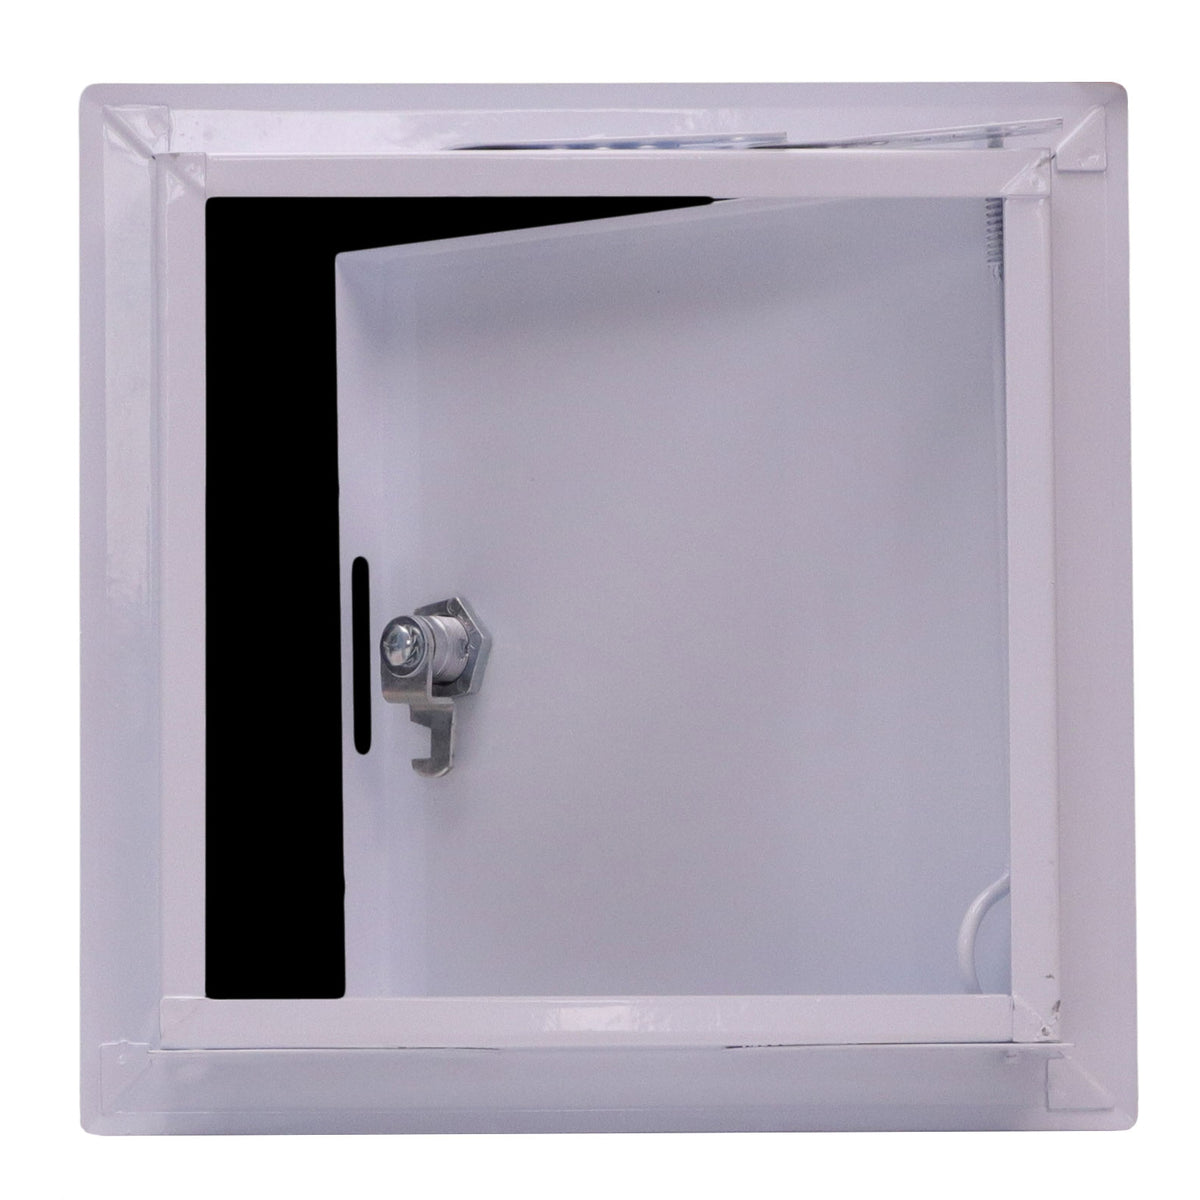 20&quot; X 20&quot; Steel Access Panel Removable Door For Wall / Ceiling Application (Lock and Key) With Frame - [Outer Dimensions: 21&quot; Width X 21&quot; Height]